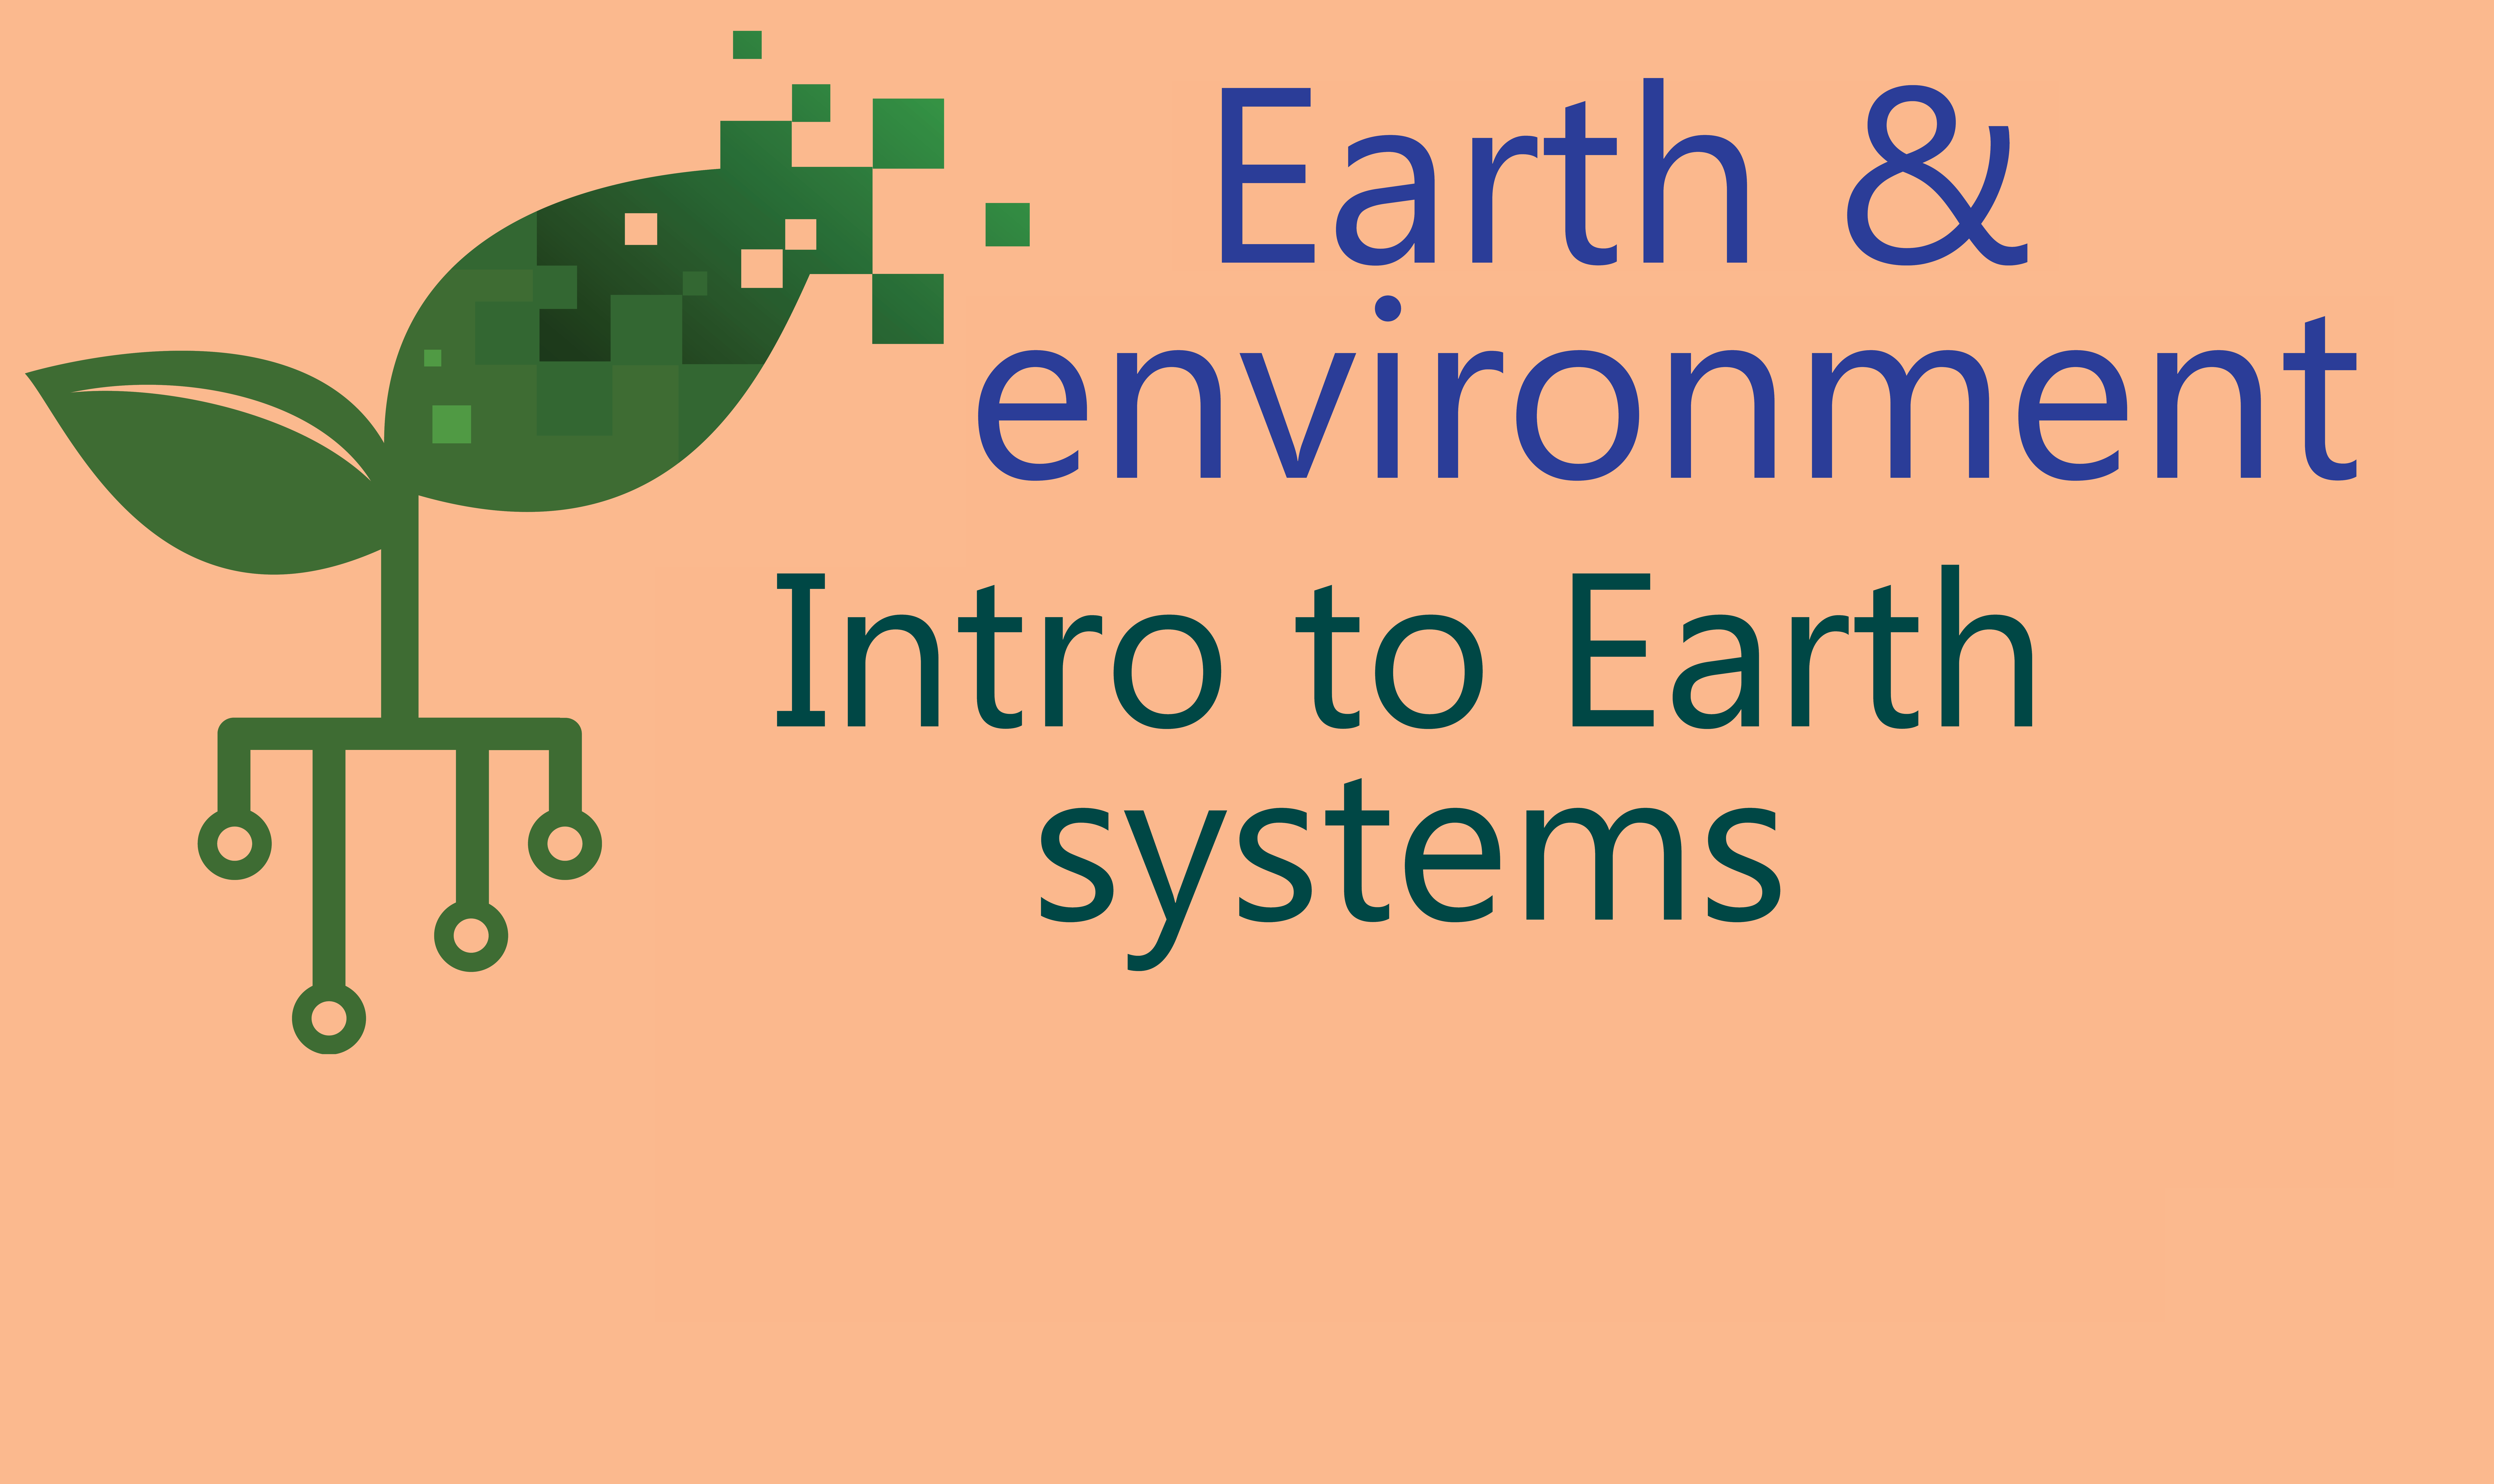 Introduction to Earth systems | Senior Earth and Environmental Science | meriSTEM EarthSystems